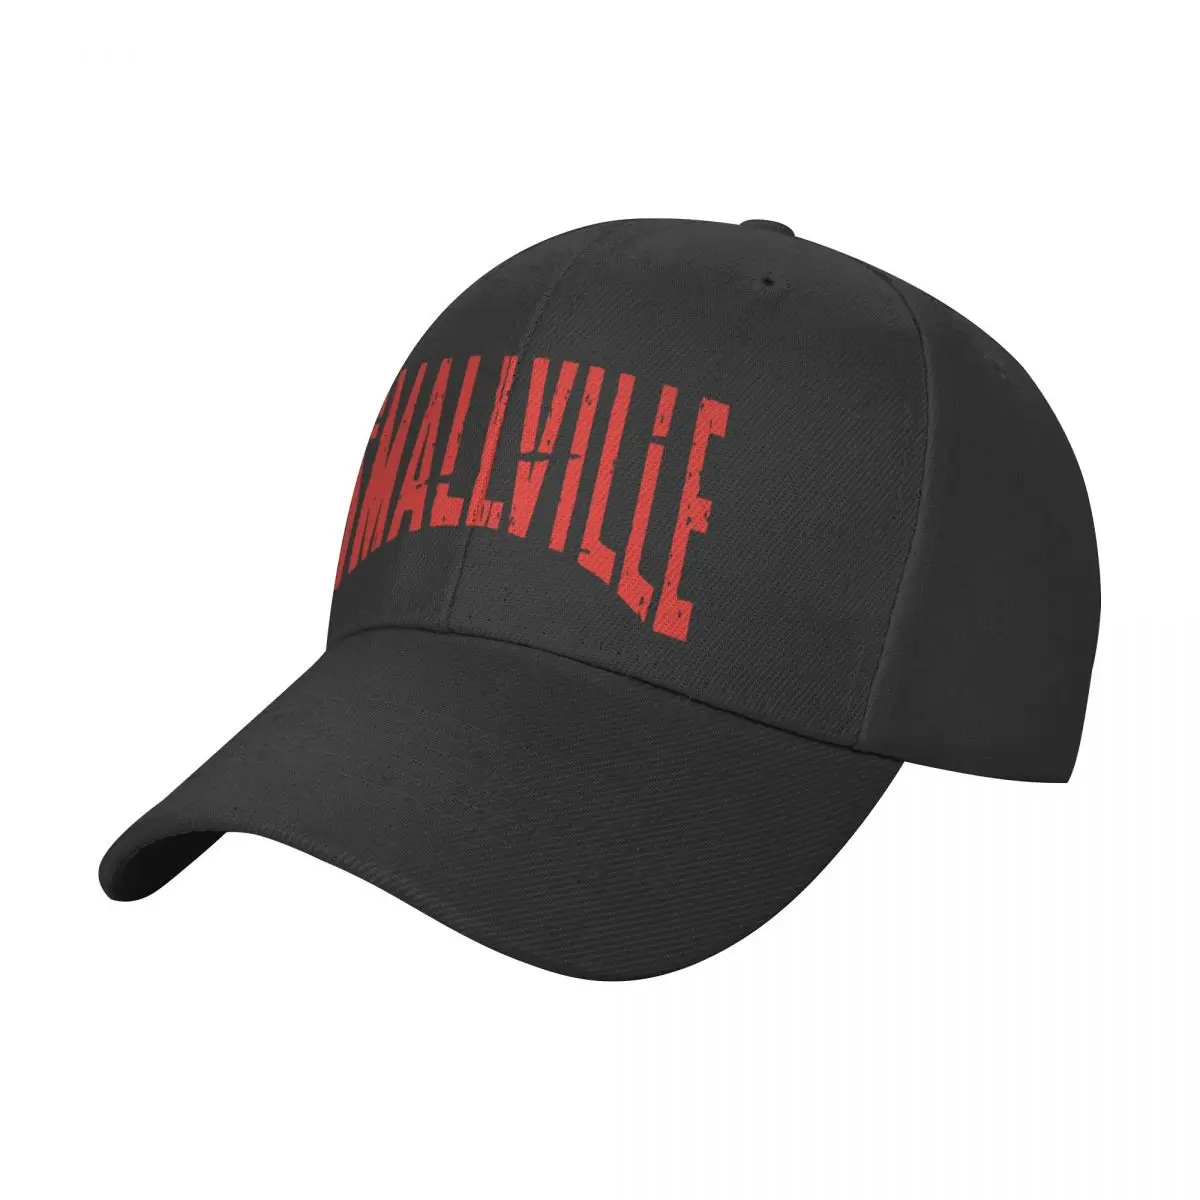 

Magic Love Smallville For Cap, Casquette, Polyester Cap Trendy Wicking Curved Brim Birthday Gift Customizable